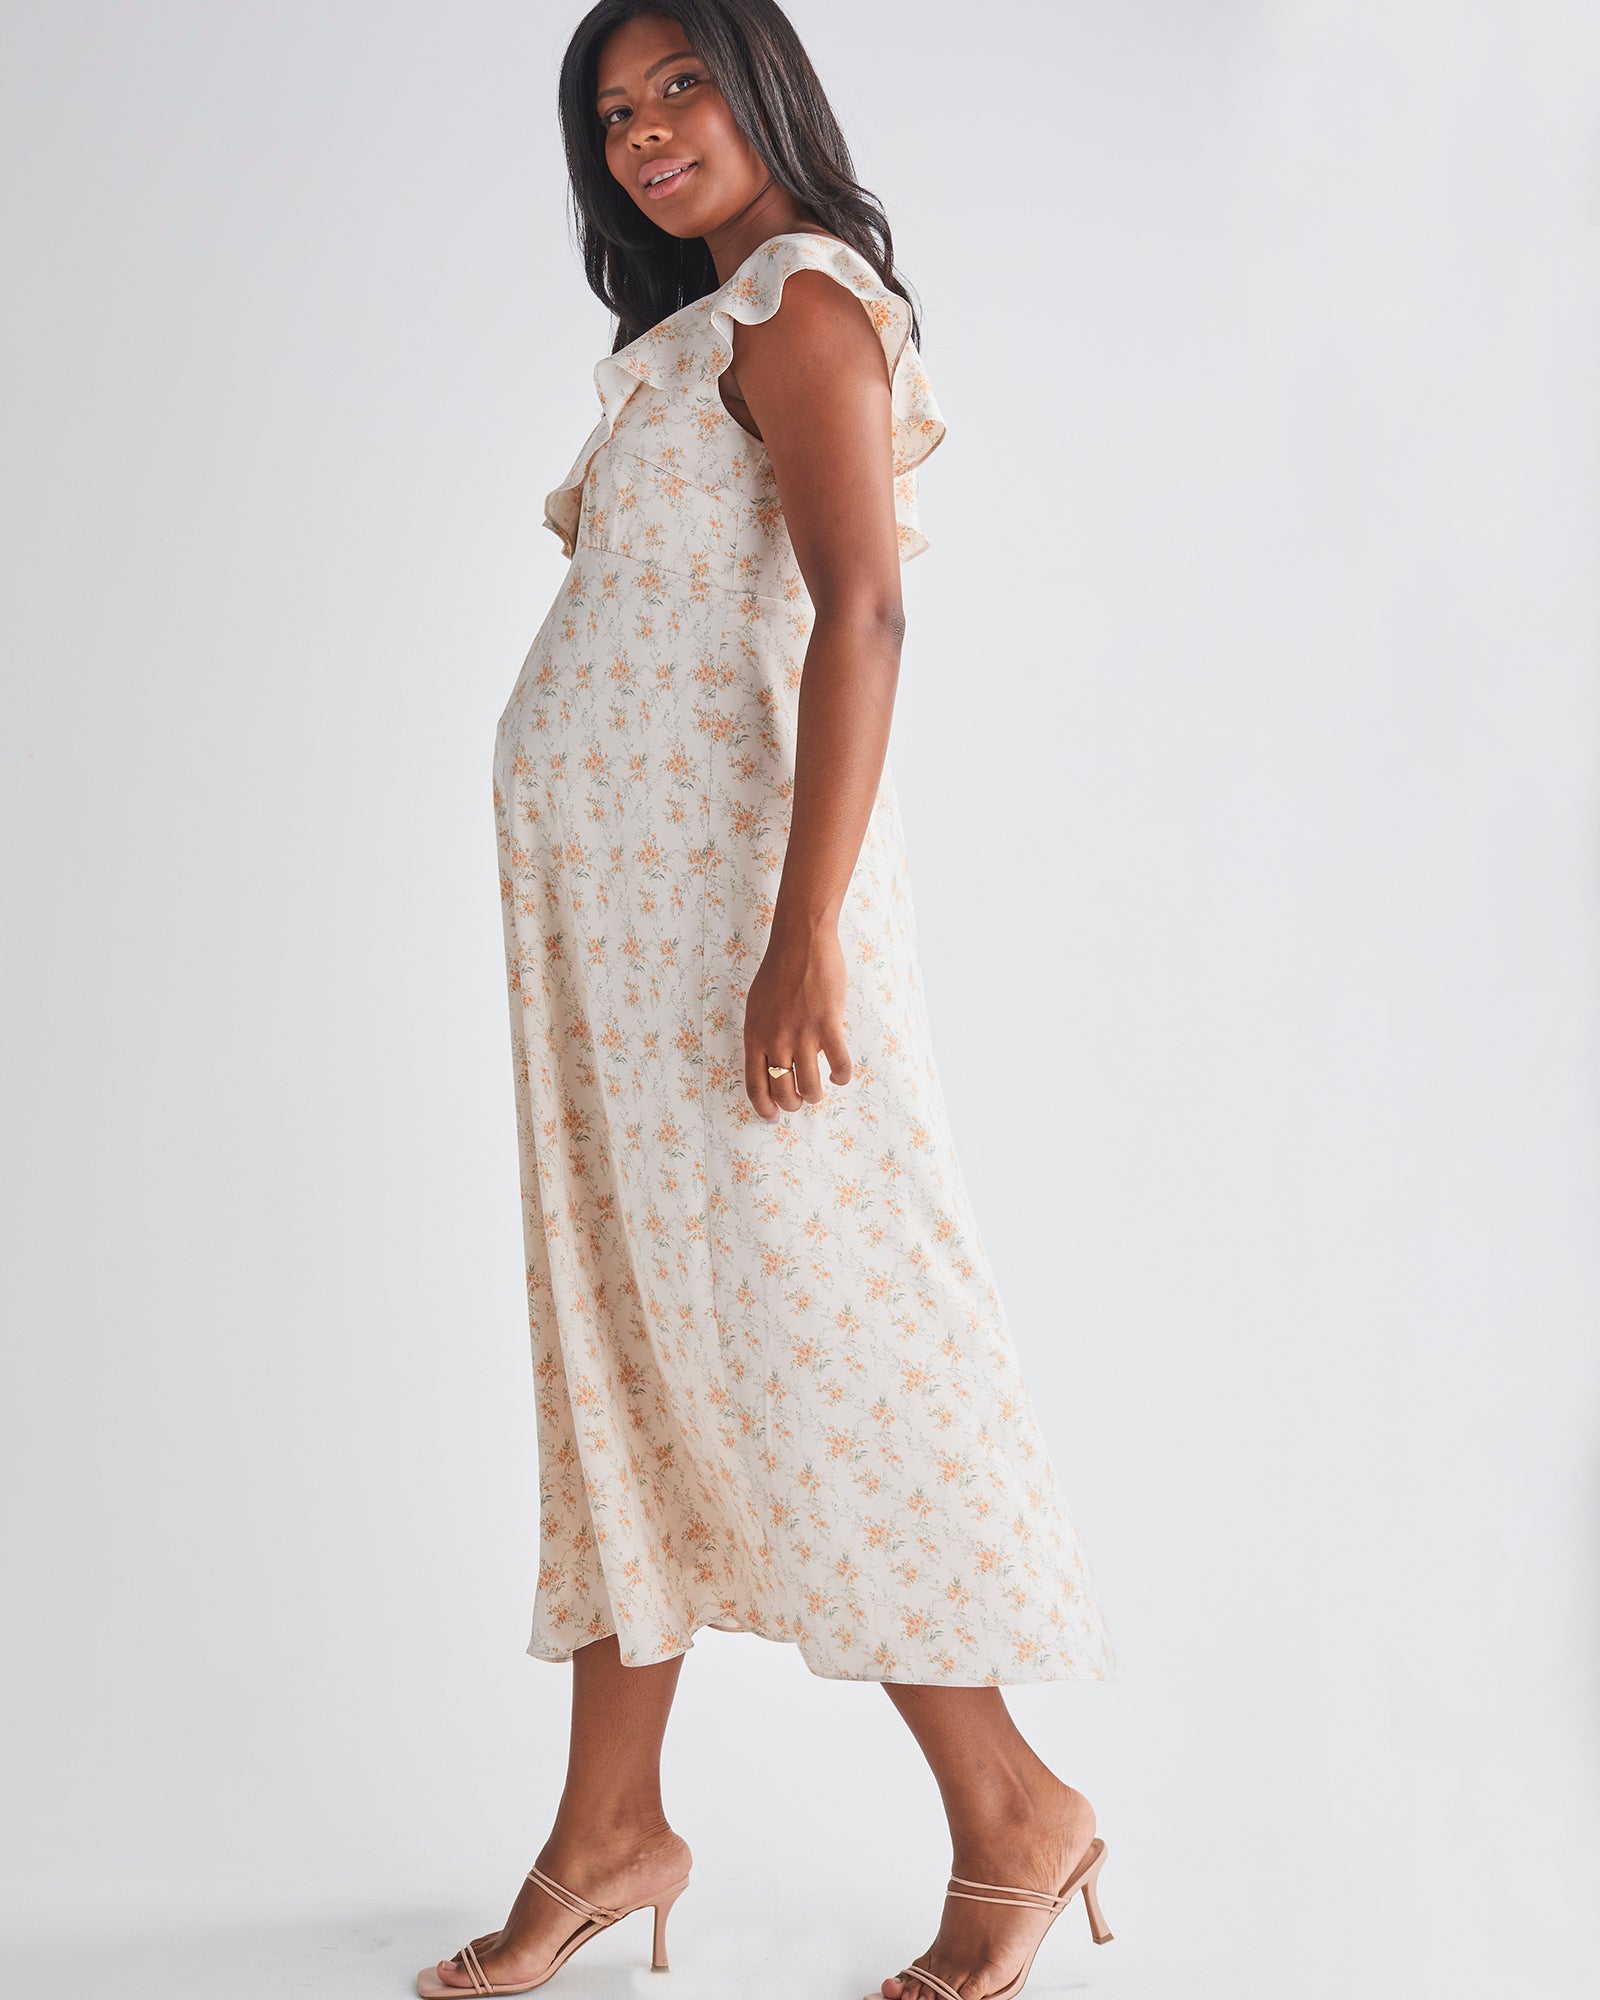 Side view-Delicate ruffle detail at neckline - Smocked, stretch back for comfort - Midi length A-line - Lined top fron Angel Maternity